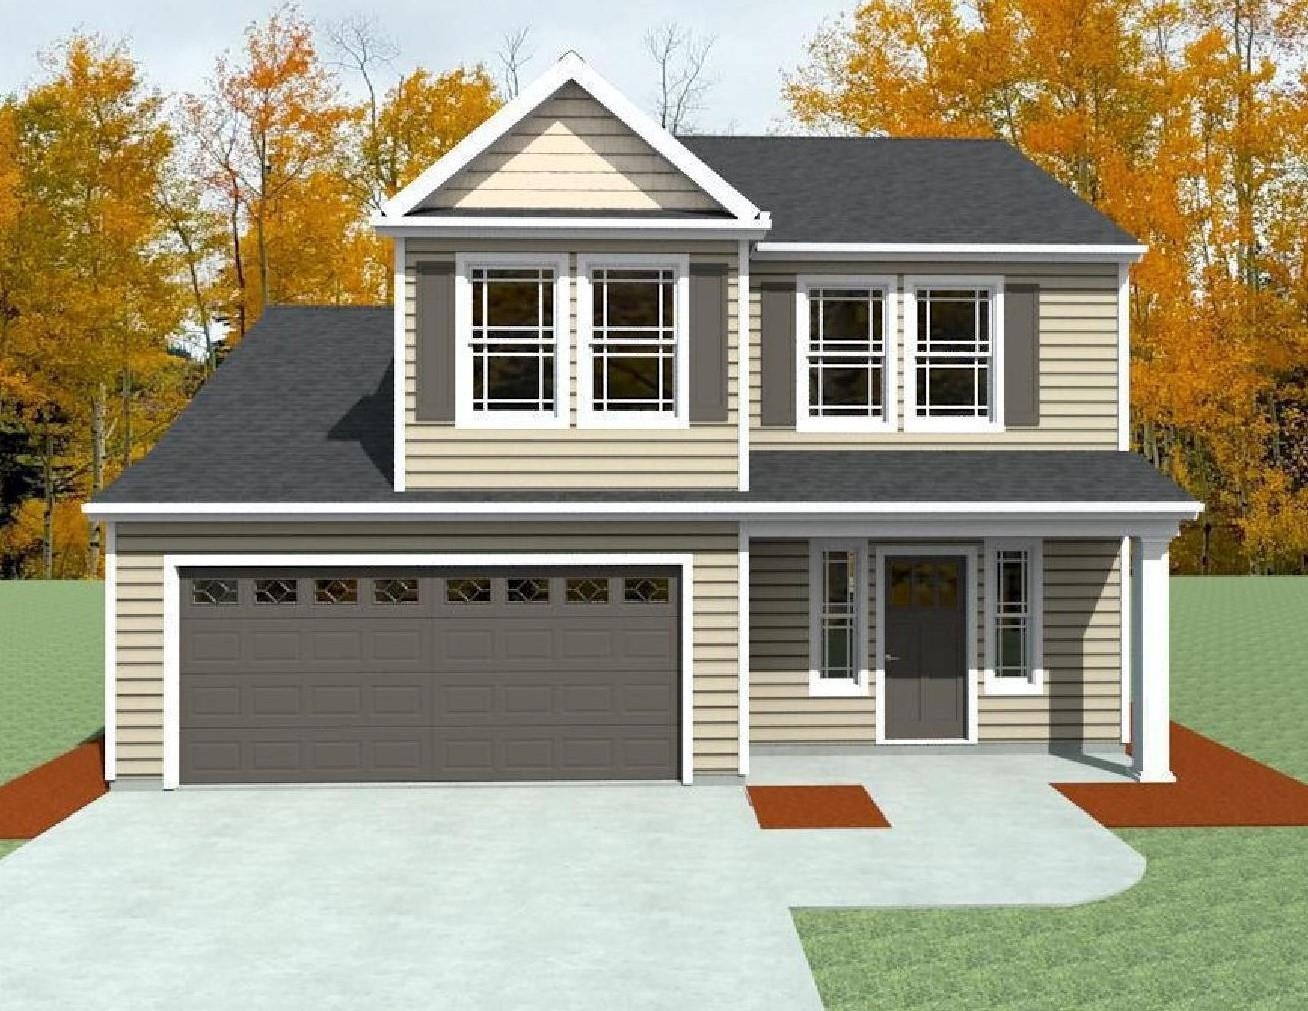 This is the REYNOLDS floorplan. 2 story home featuring 3 bedrooms, 2 1/2 bathrooms, trey ceiling in master bedroom, gas fireplace, and 12x12 back patio. Located in the NEW Elliott park community in Lyman just minutes from Spartanburg and Greenville. Call today for more info!